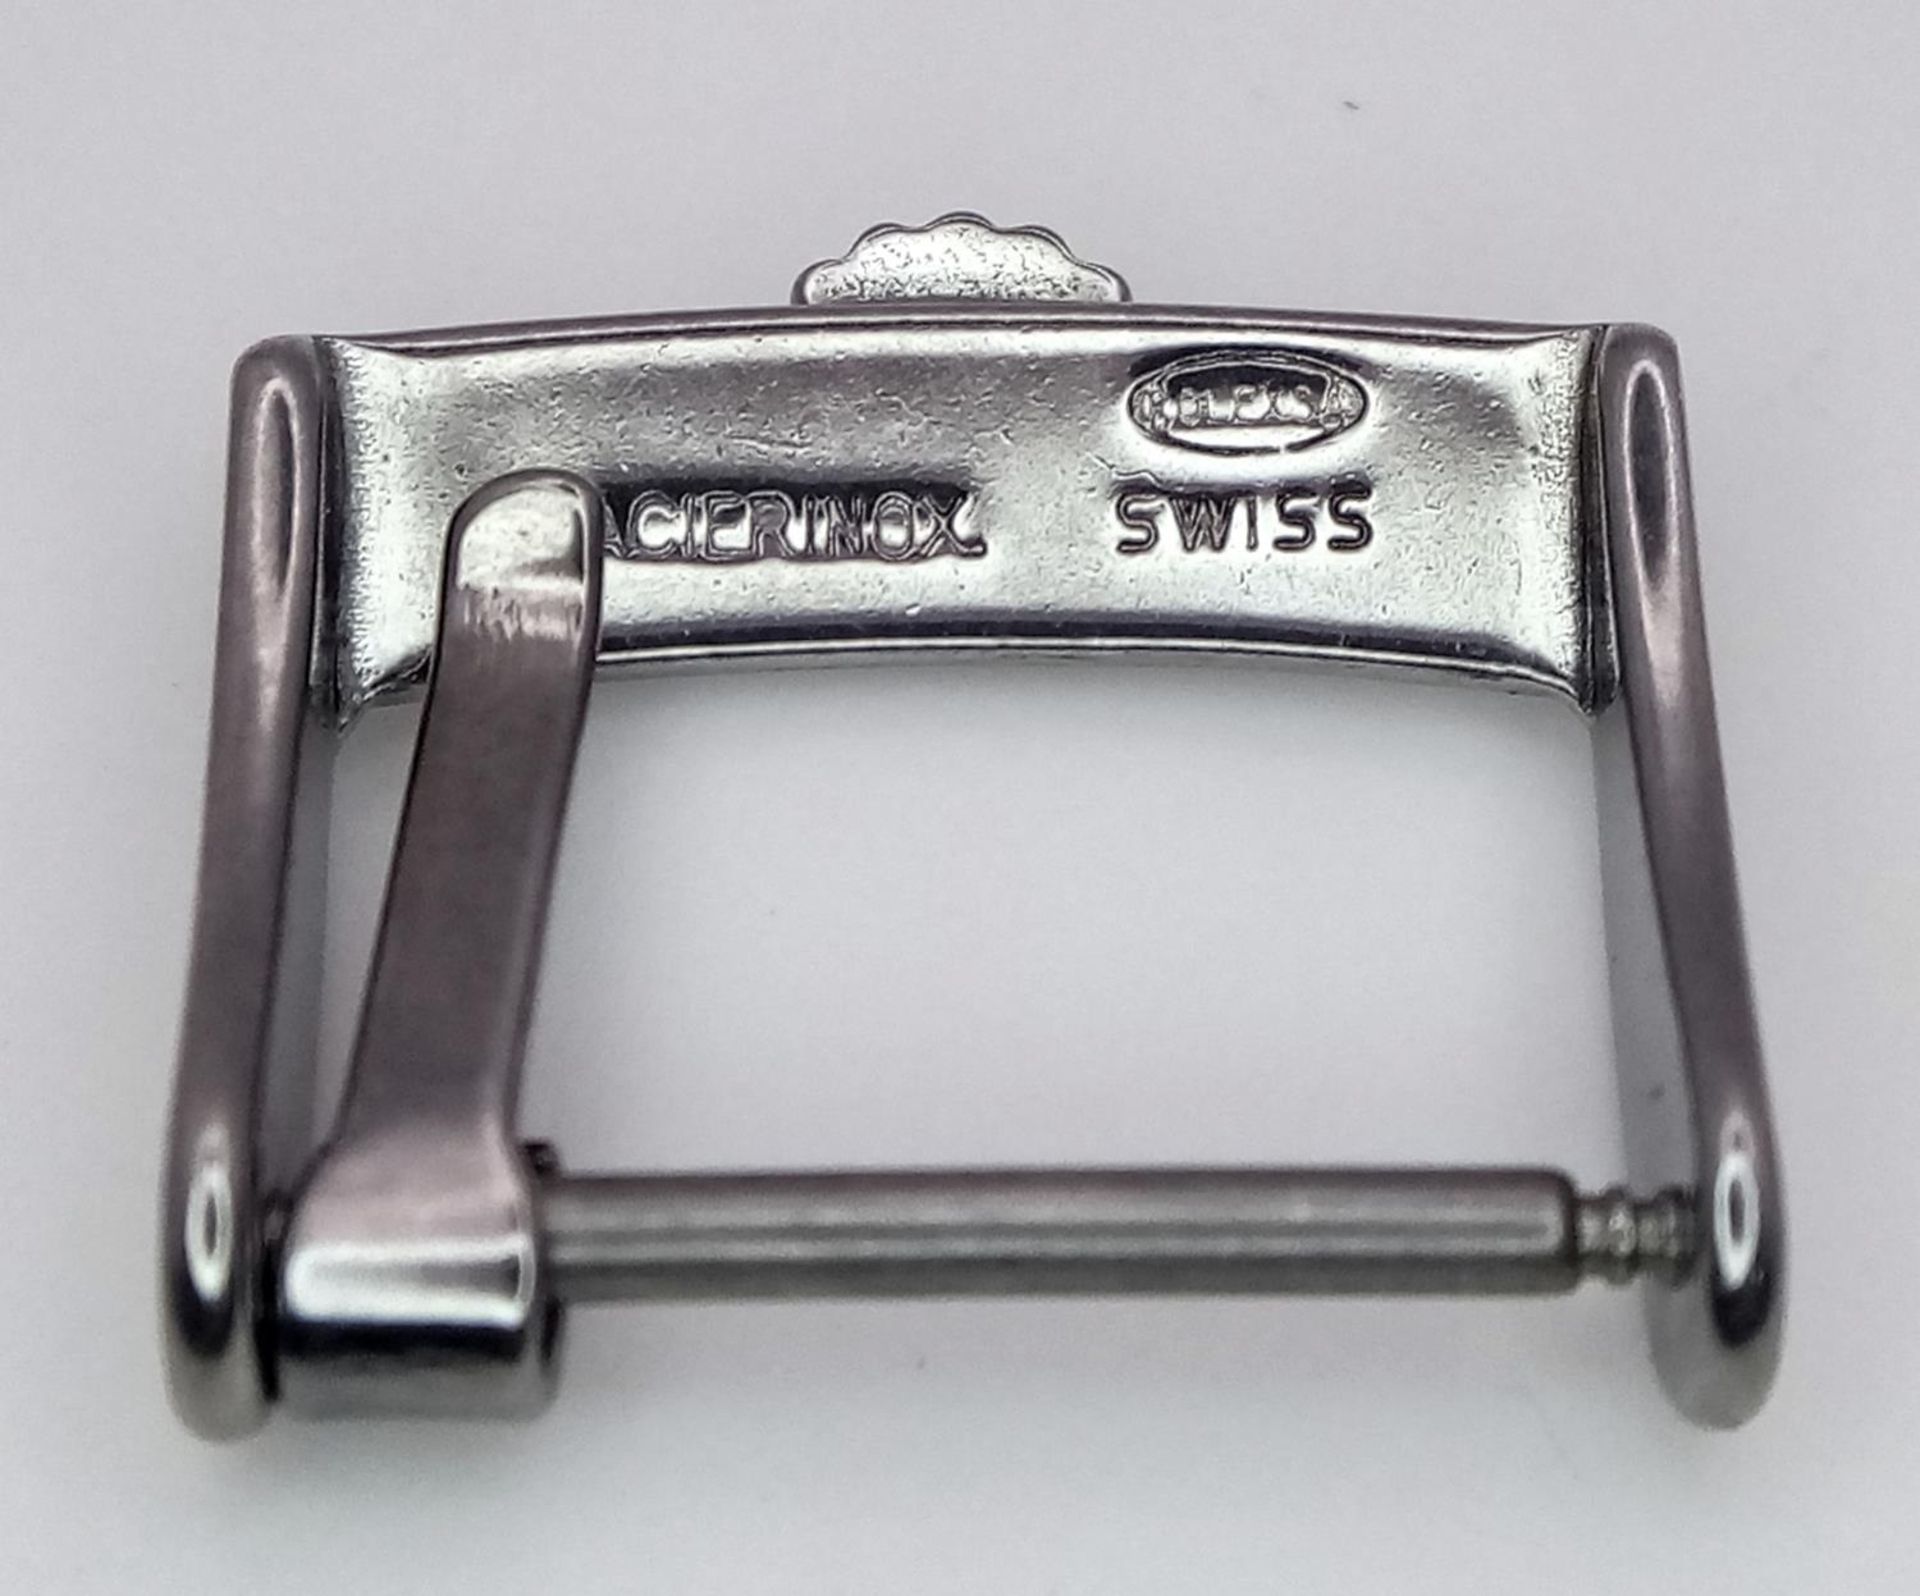 A Rolex Branded Watch Strap Buckle. - Image 3 of 4